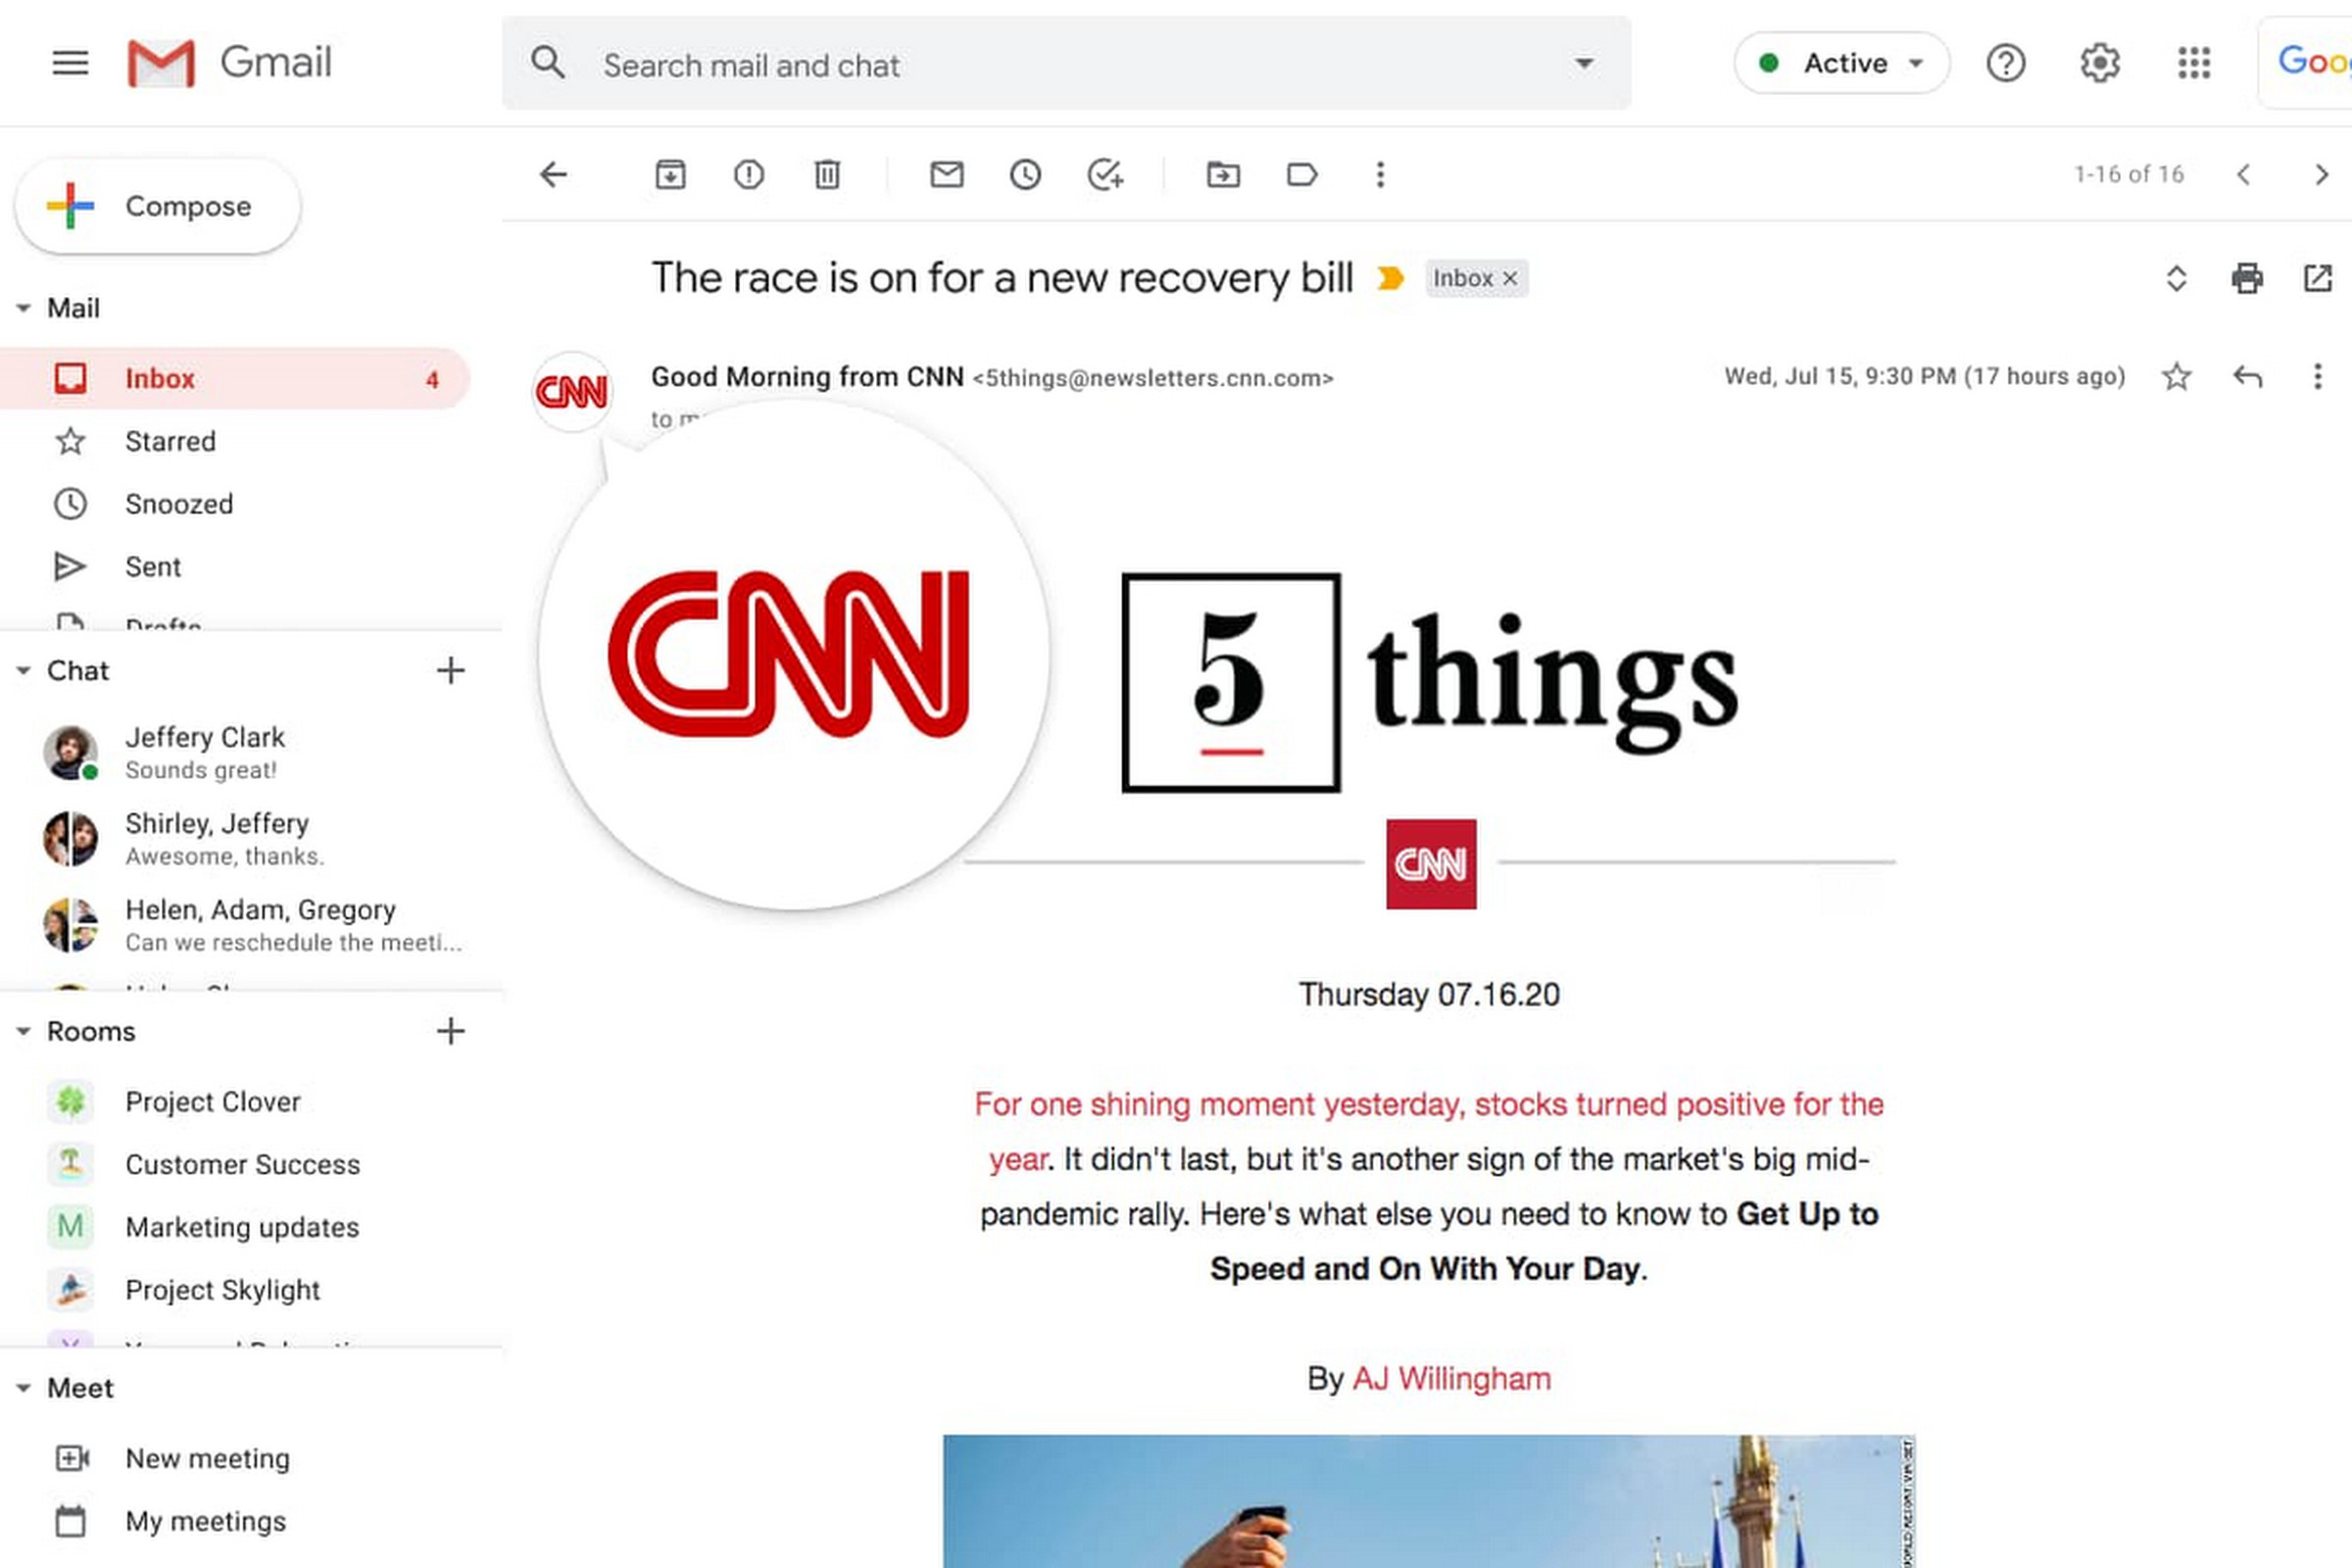 Here, CNN’s logo is shown so you know it’s coming from the news organization.